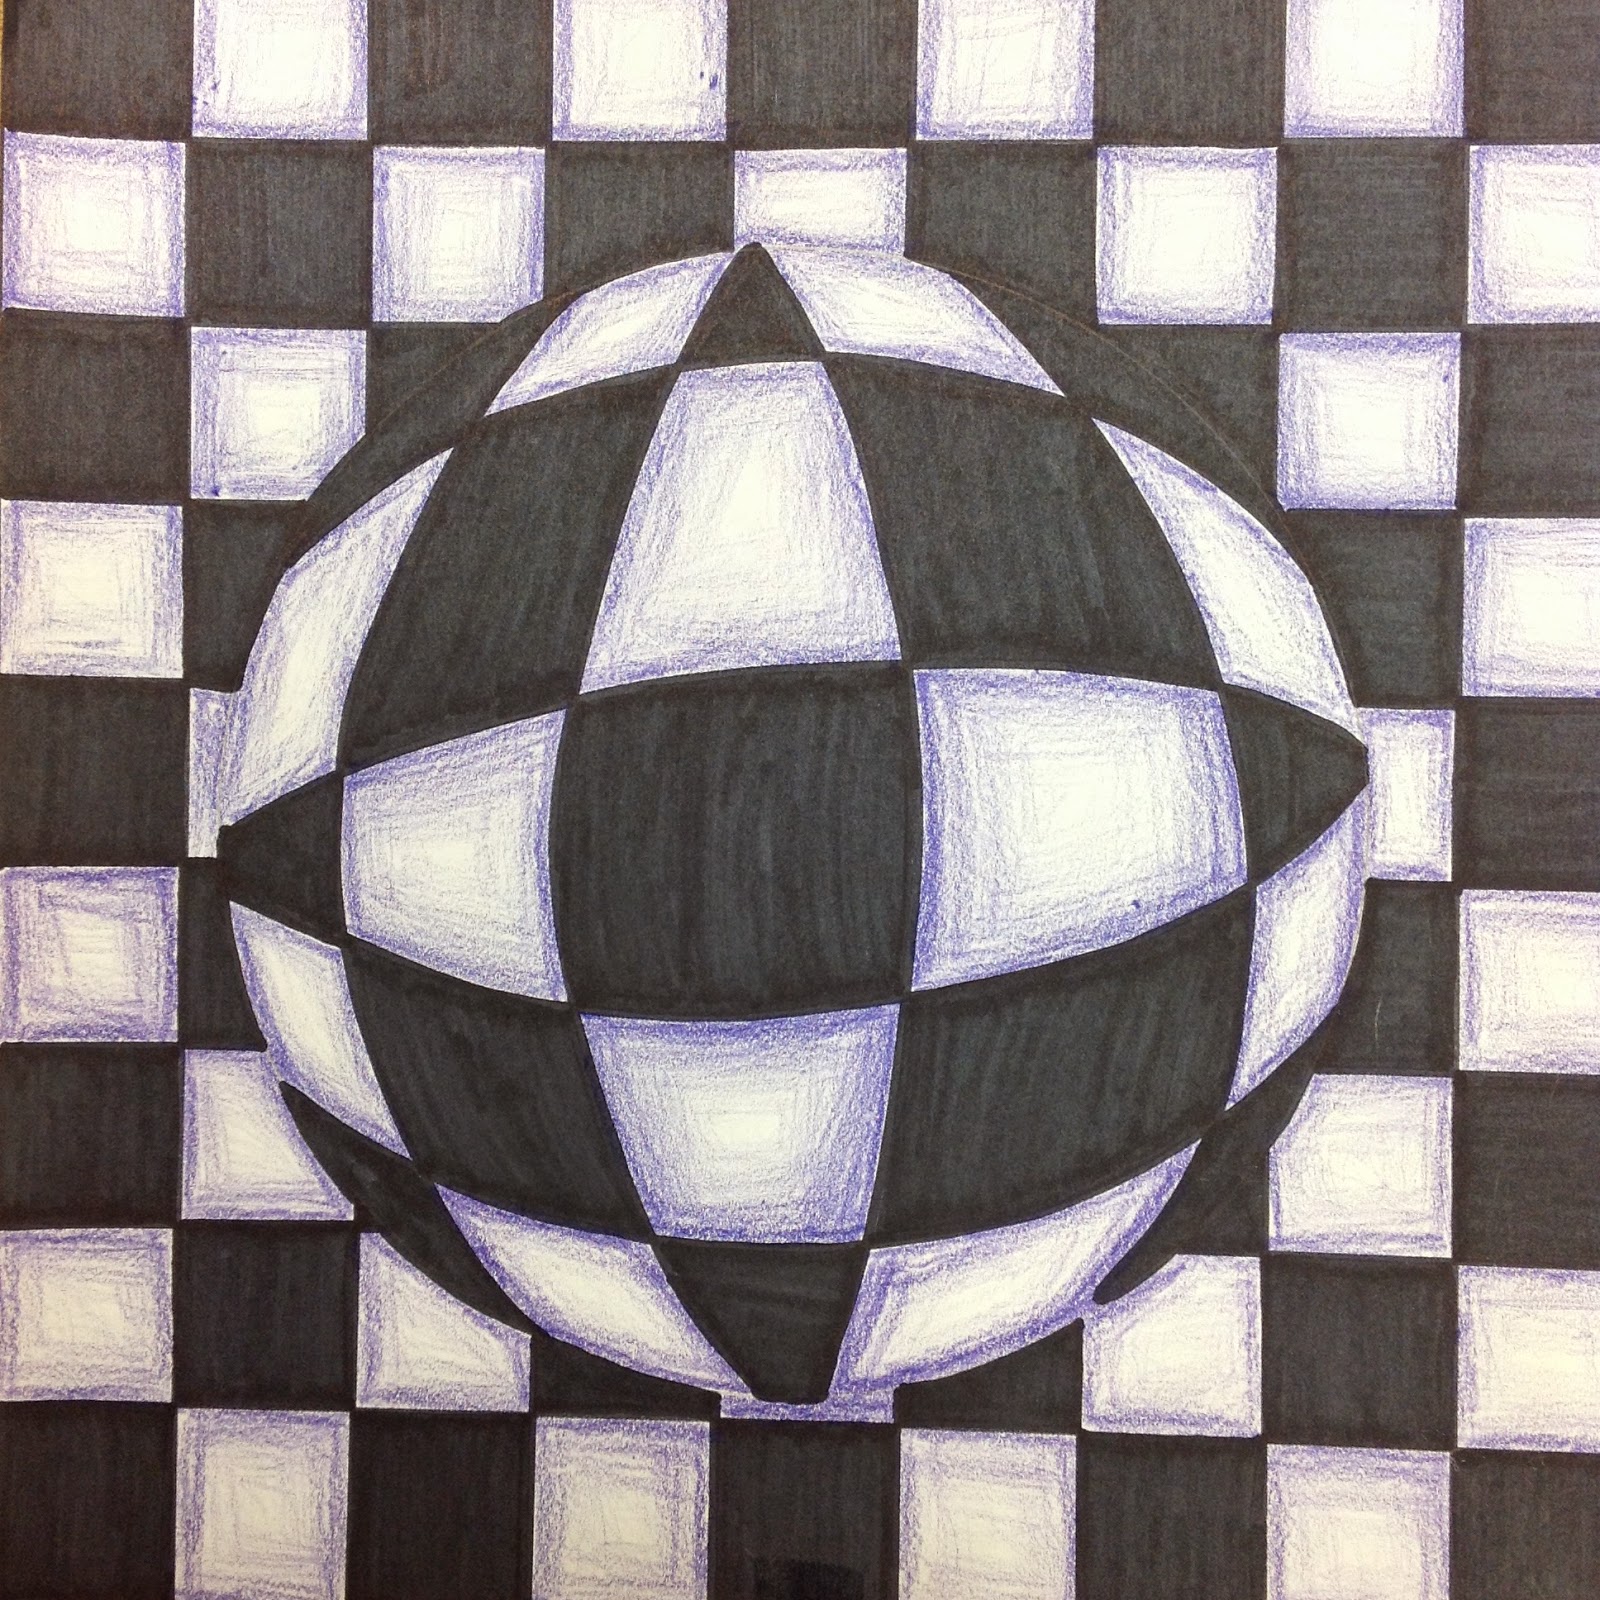 Great How To Draw An Optical Illusion in the world Check it out now 